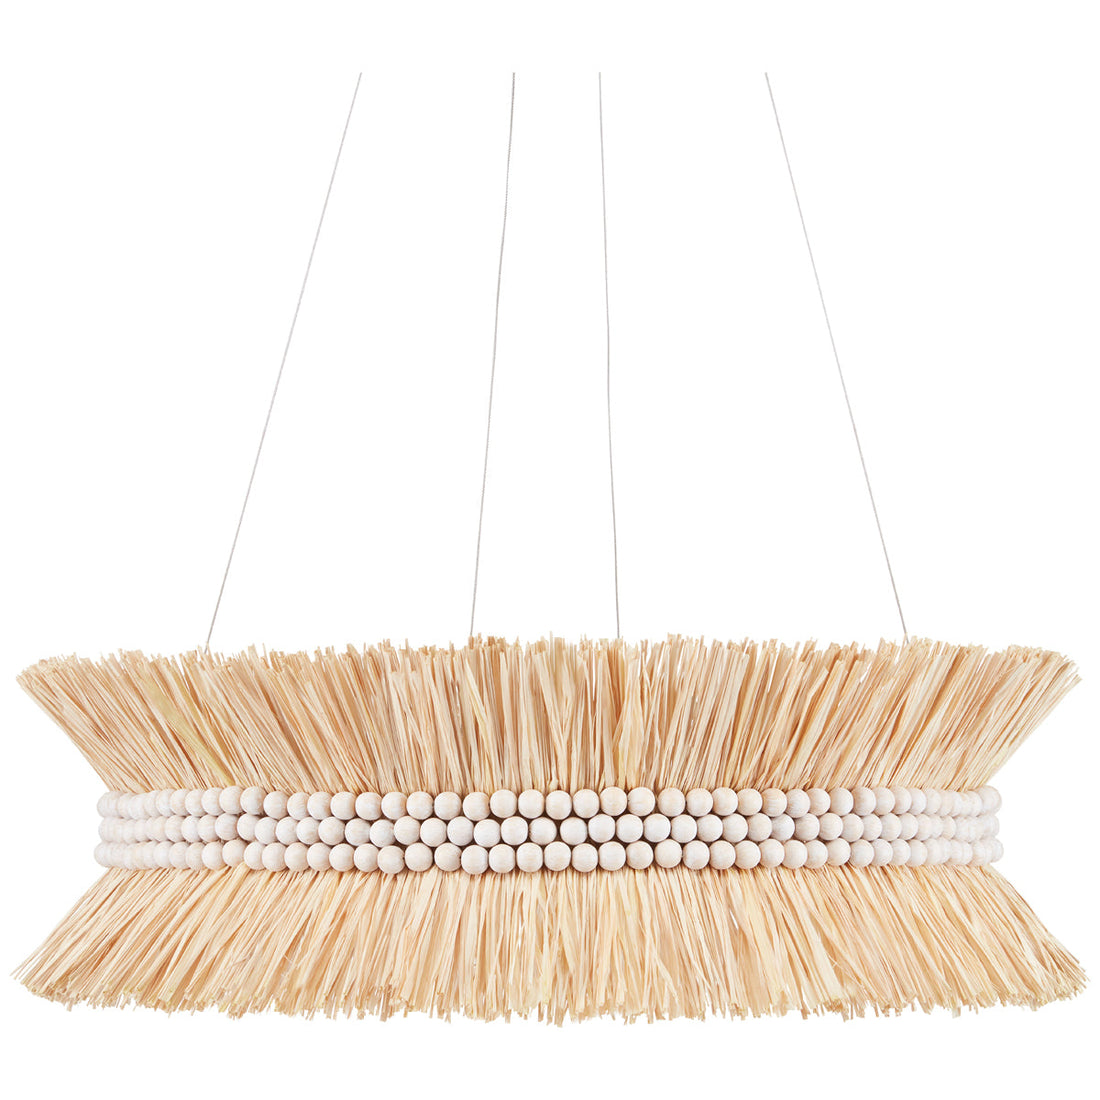 Currey and Company Seychelles Chandelier